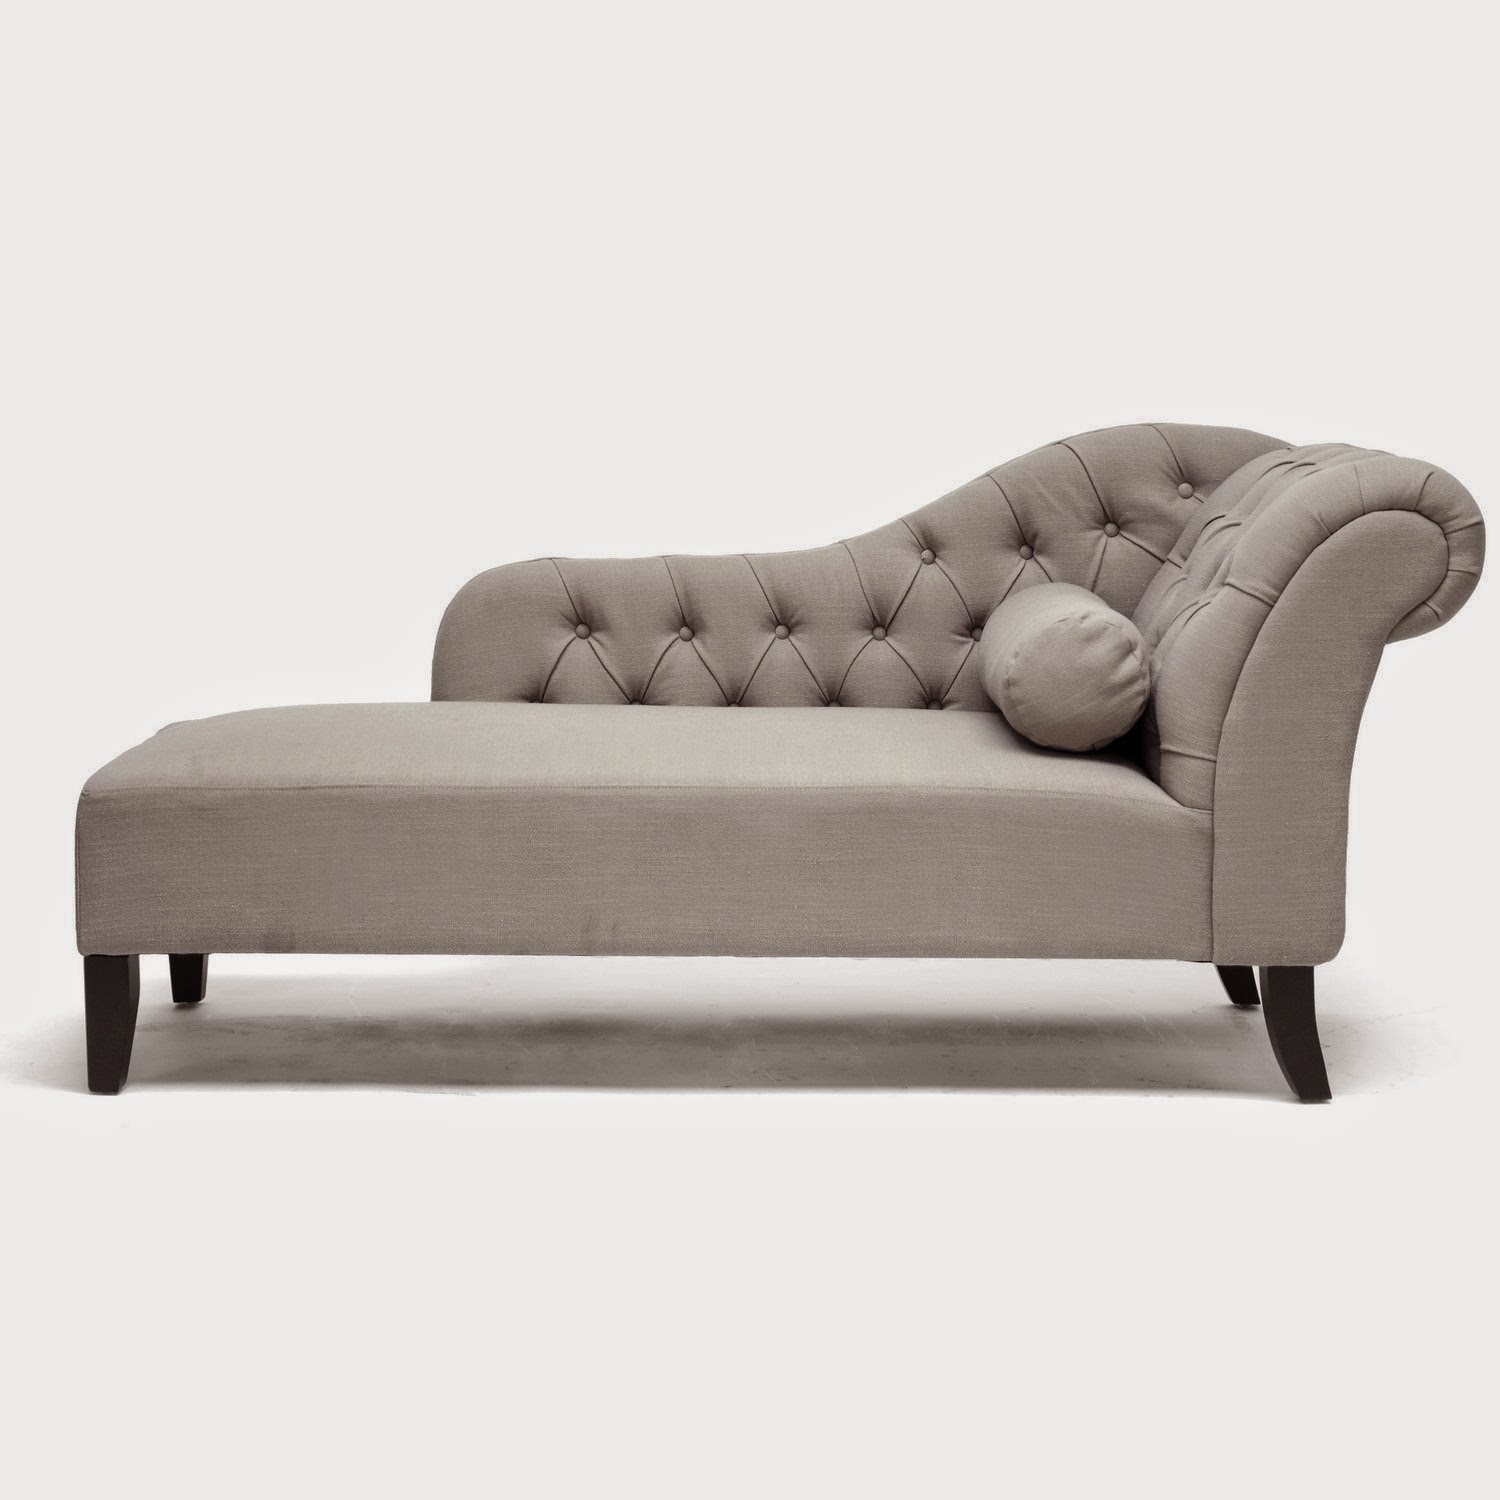 Comfortable Chaise Lounges For Reading And Relaxation